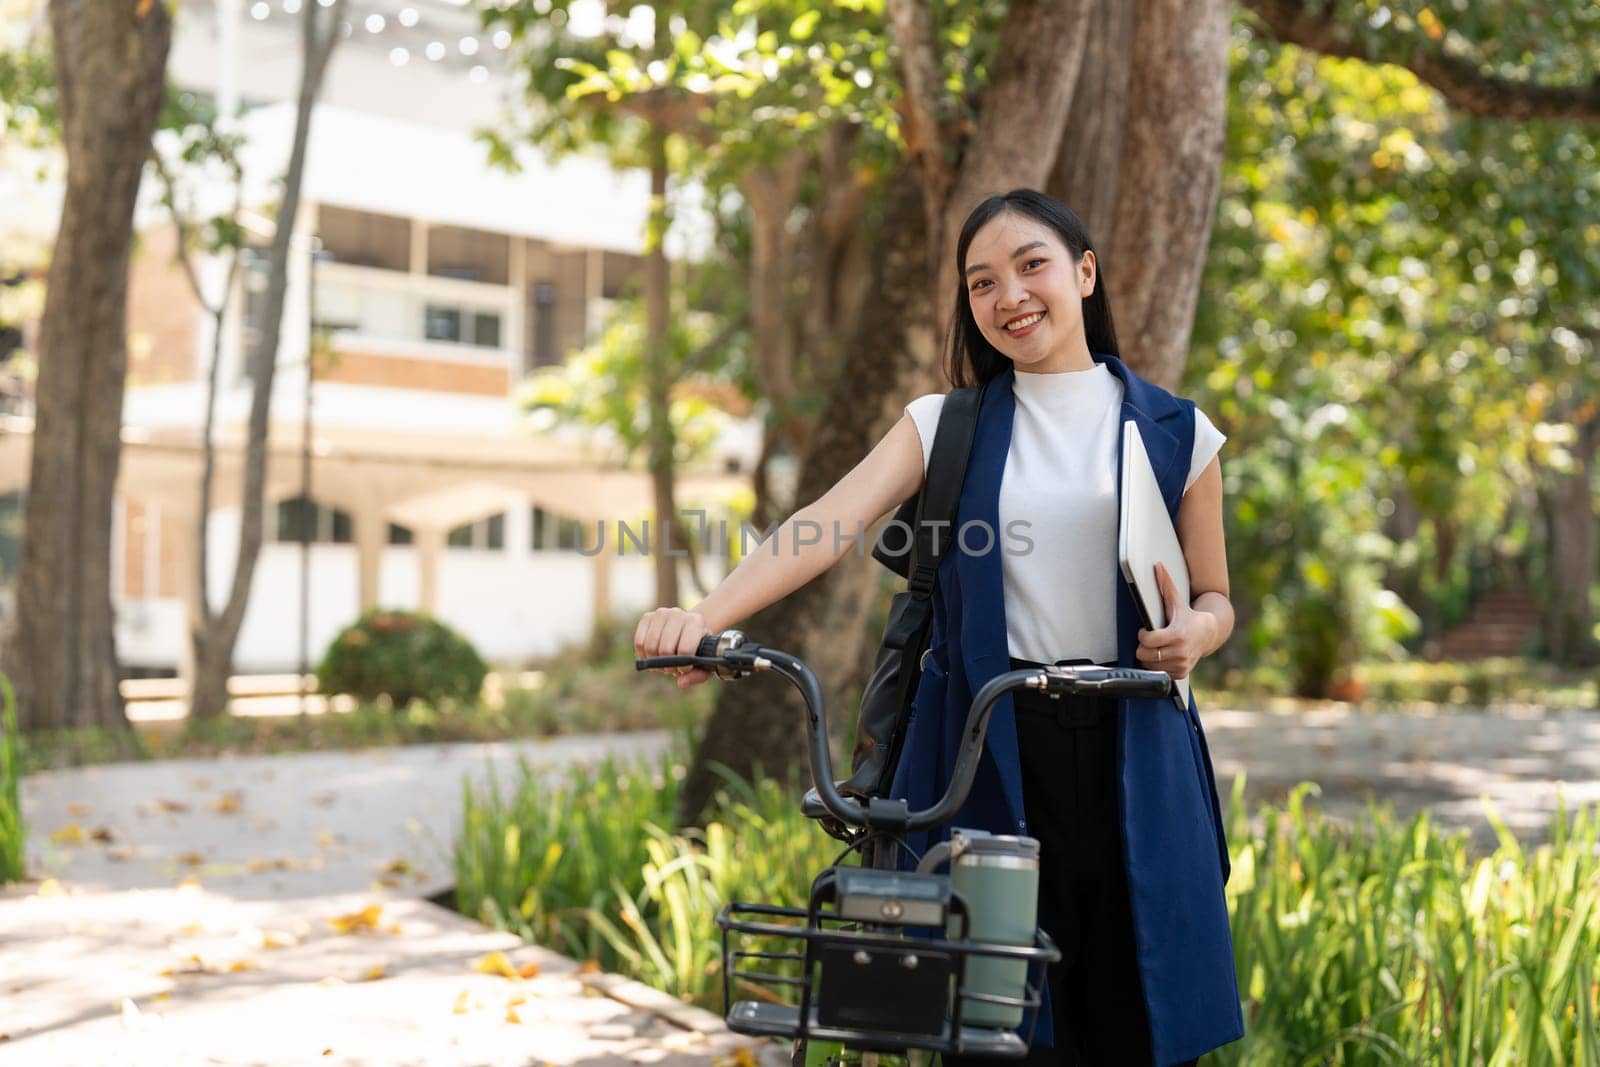 Smiling Asian businesswoman holding a laptop and standing with her bicycle outdoors, promoting eco-friendly commuting and professional success